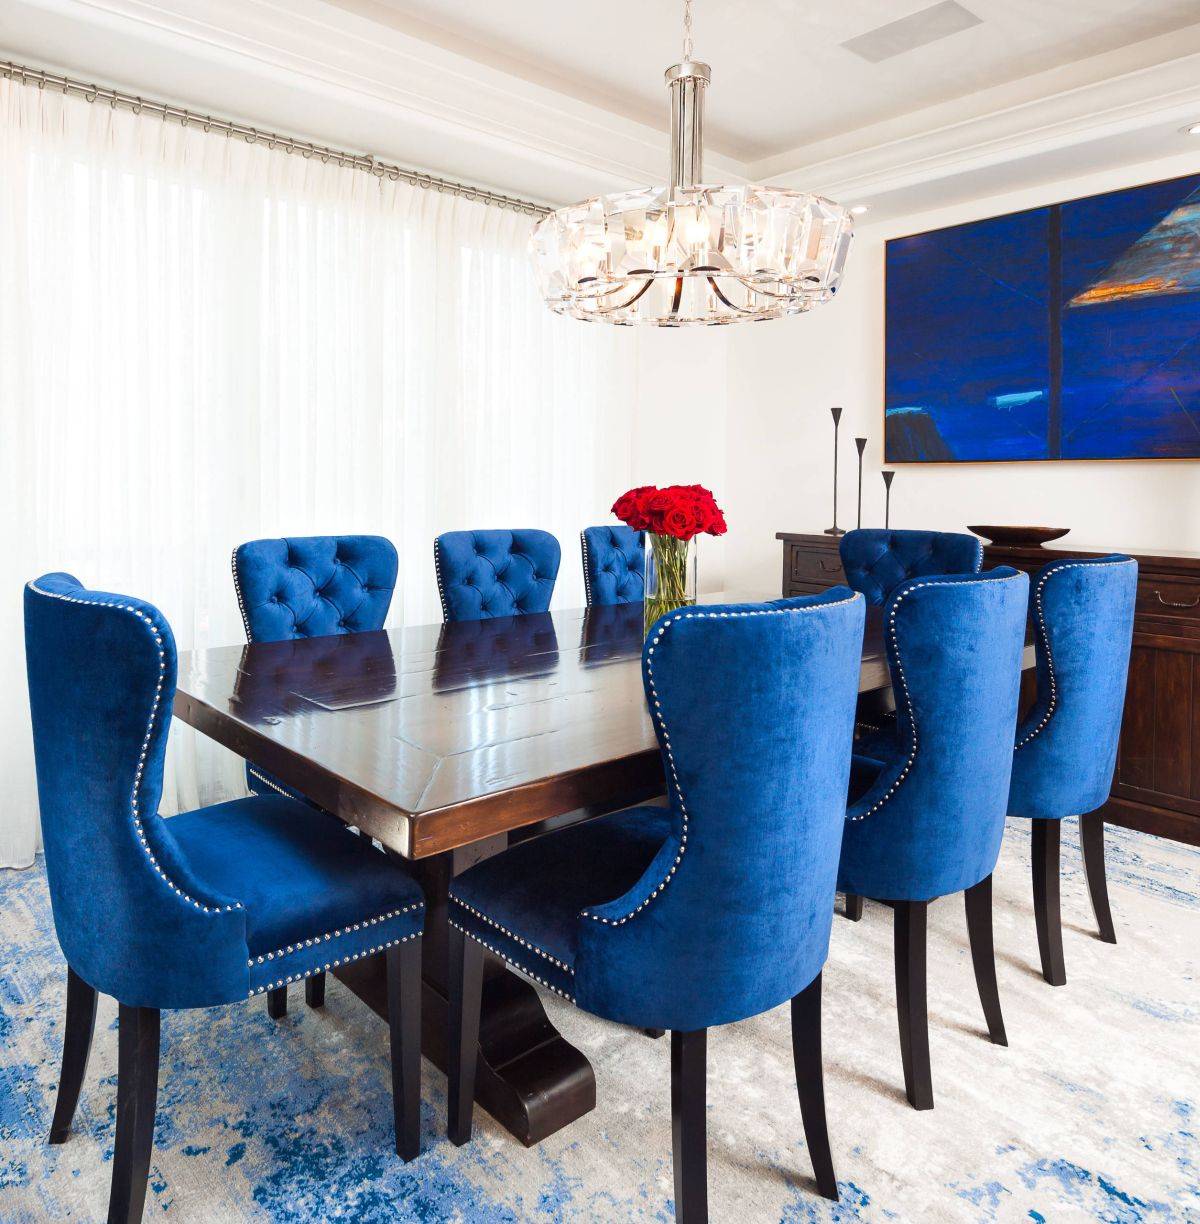 Wall-art-in-deep-blue-perfectly-complements-the-colorful-chairs-in-this-white-dining-room-73056